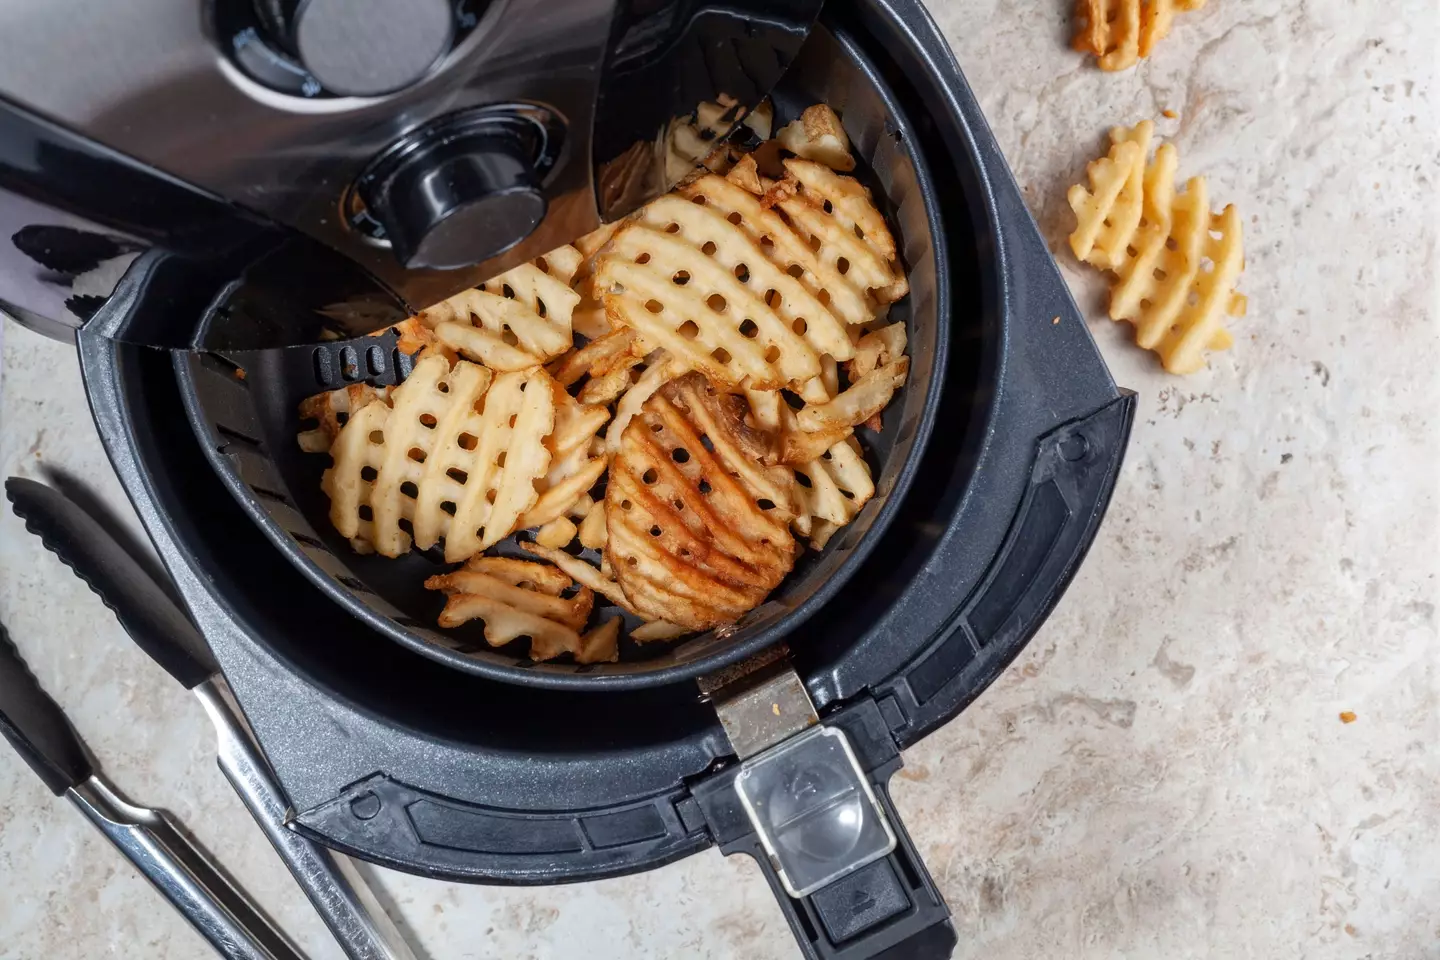 Many think that an air fryer is a lot cheaper to run, but that is not always the case.